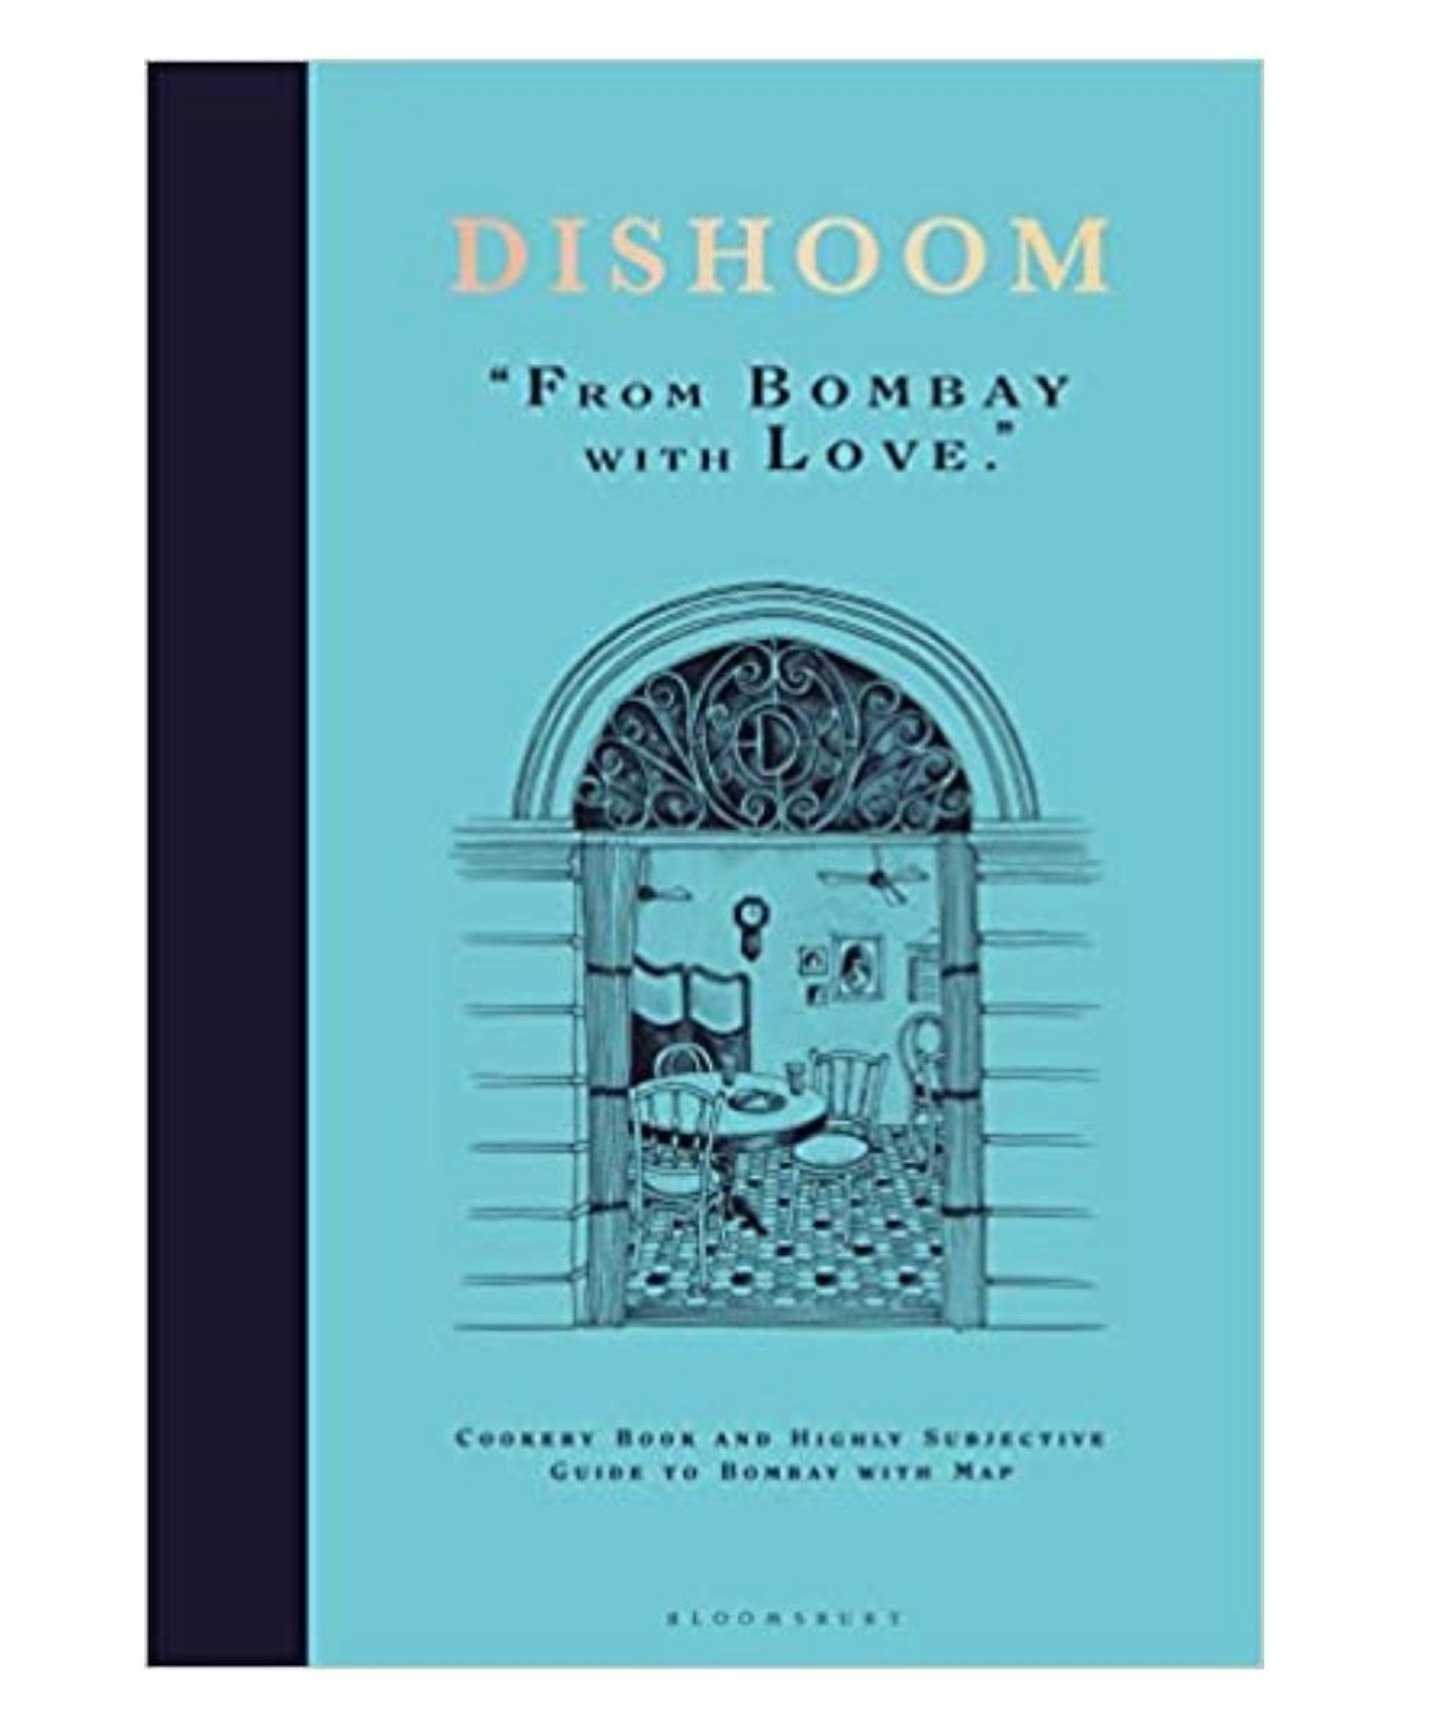 Dishoom: The First Ever Cookbook For Much-Loved Indian Restaurant